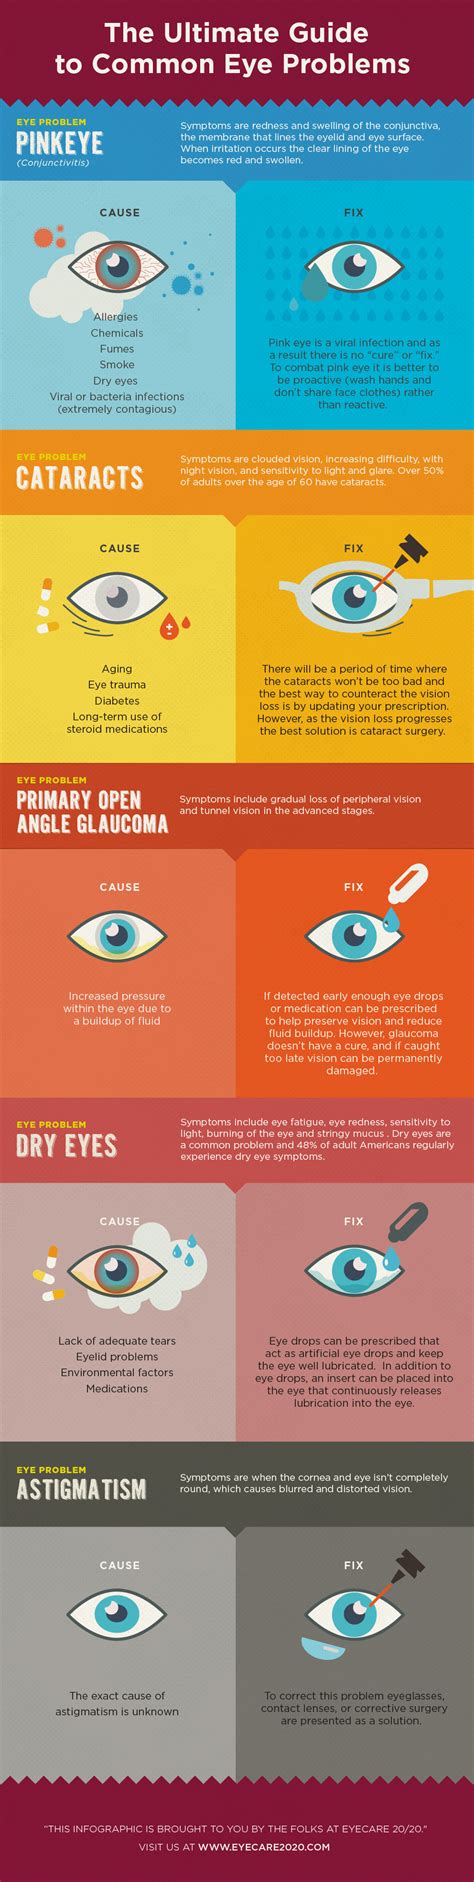 The Ultimate Guide To Common Eye Problems Infographic